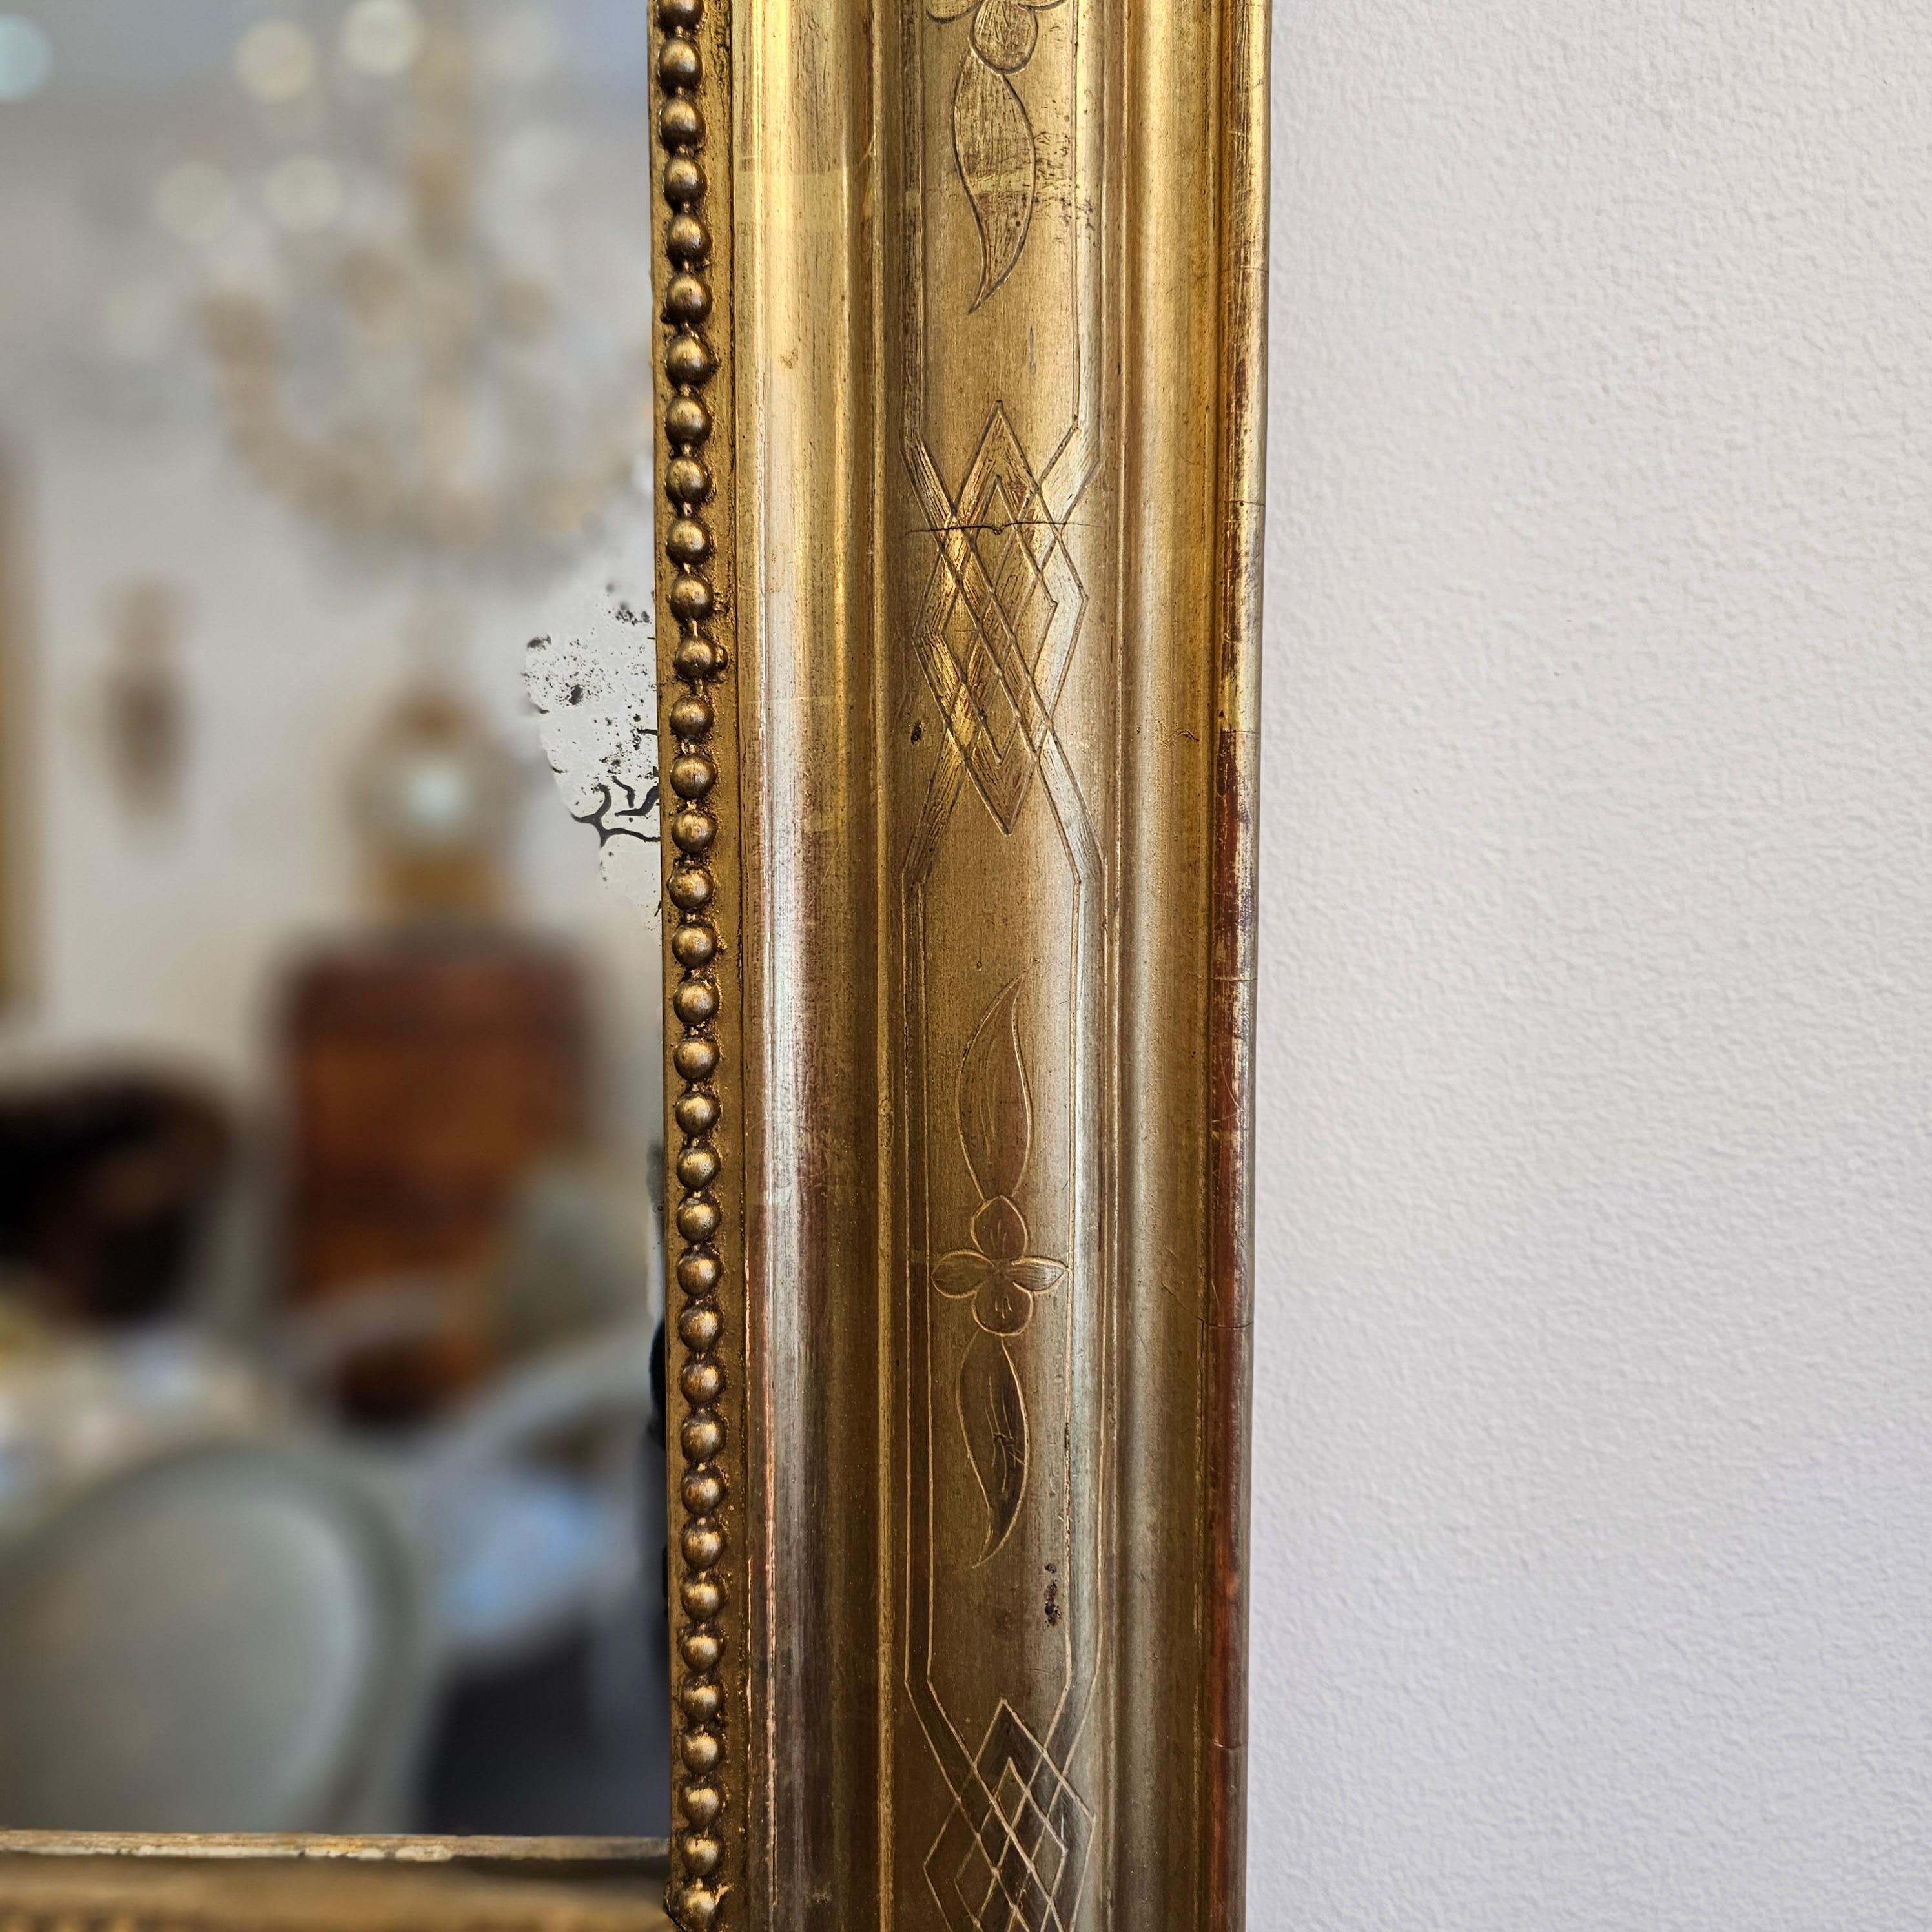 A Louis Philippe Period Gilt Mirror with Crest

c.1850, France

A beautiful antique mirror that originates in France. The mirror has the upper rounded corners typical for Louis Philippe mirrors. A beautifully carved ornamented crest with foliate